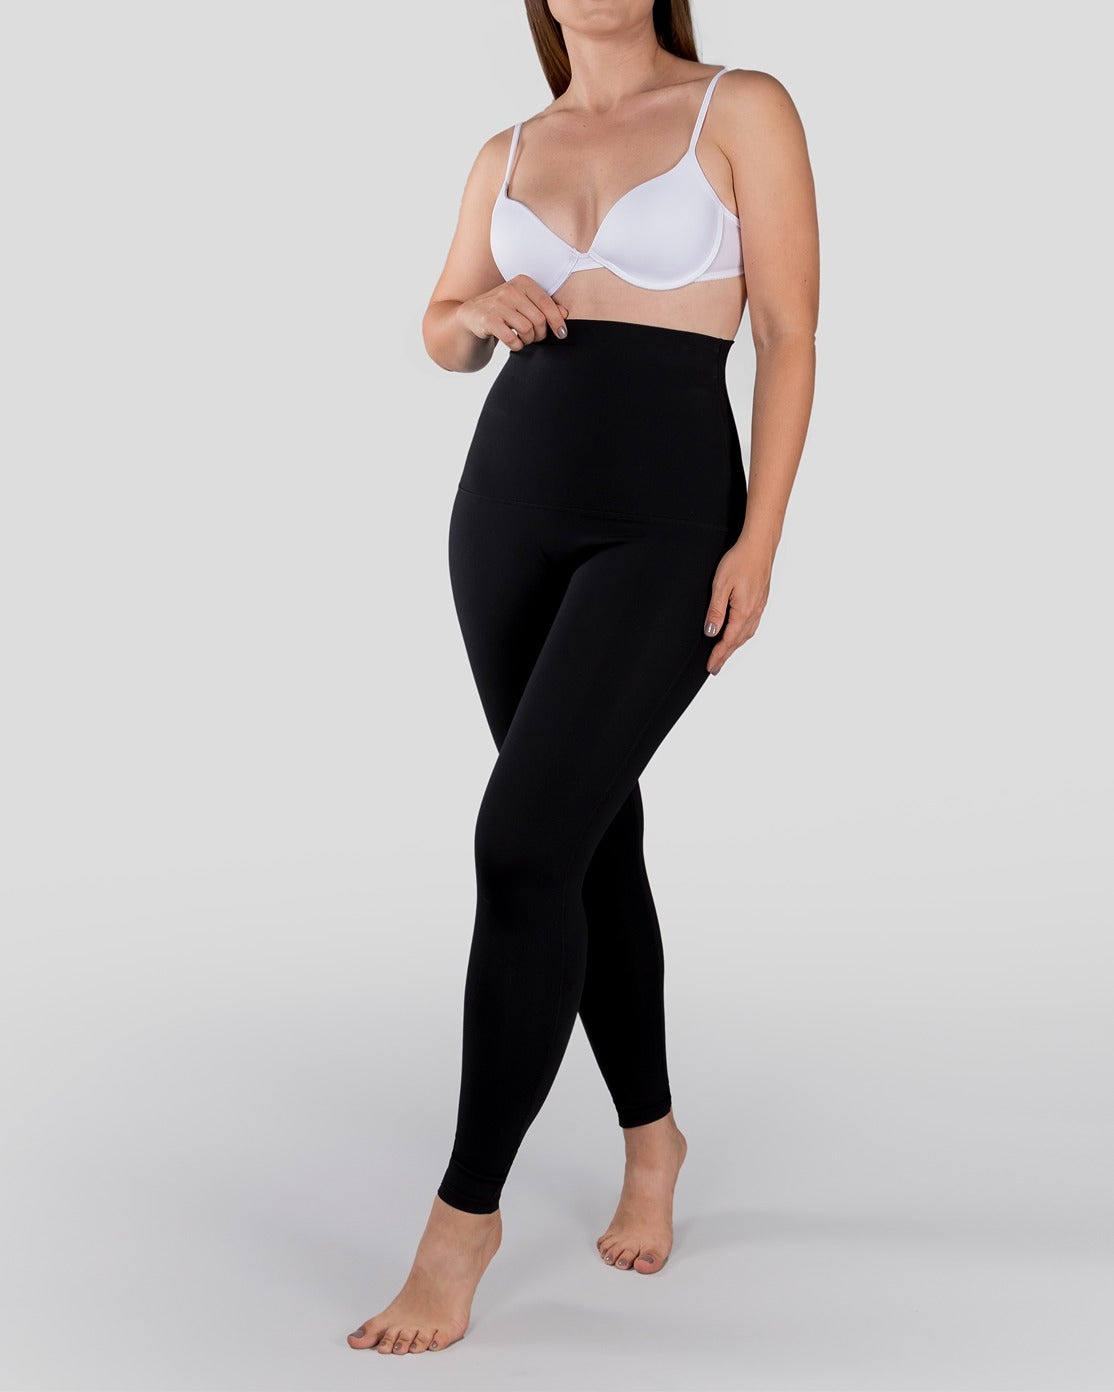 Maternity Compression Leggings Over The Belly | Black Leggings for Women  High Waisted